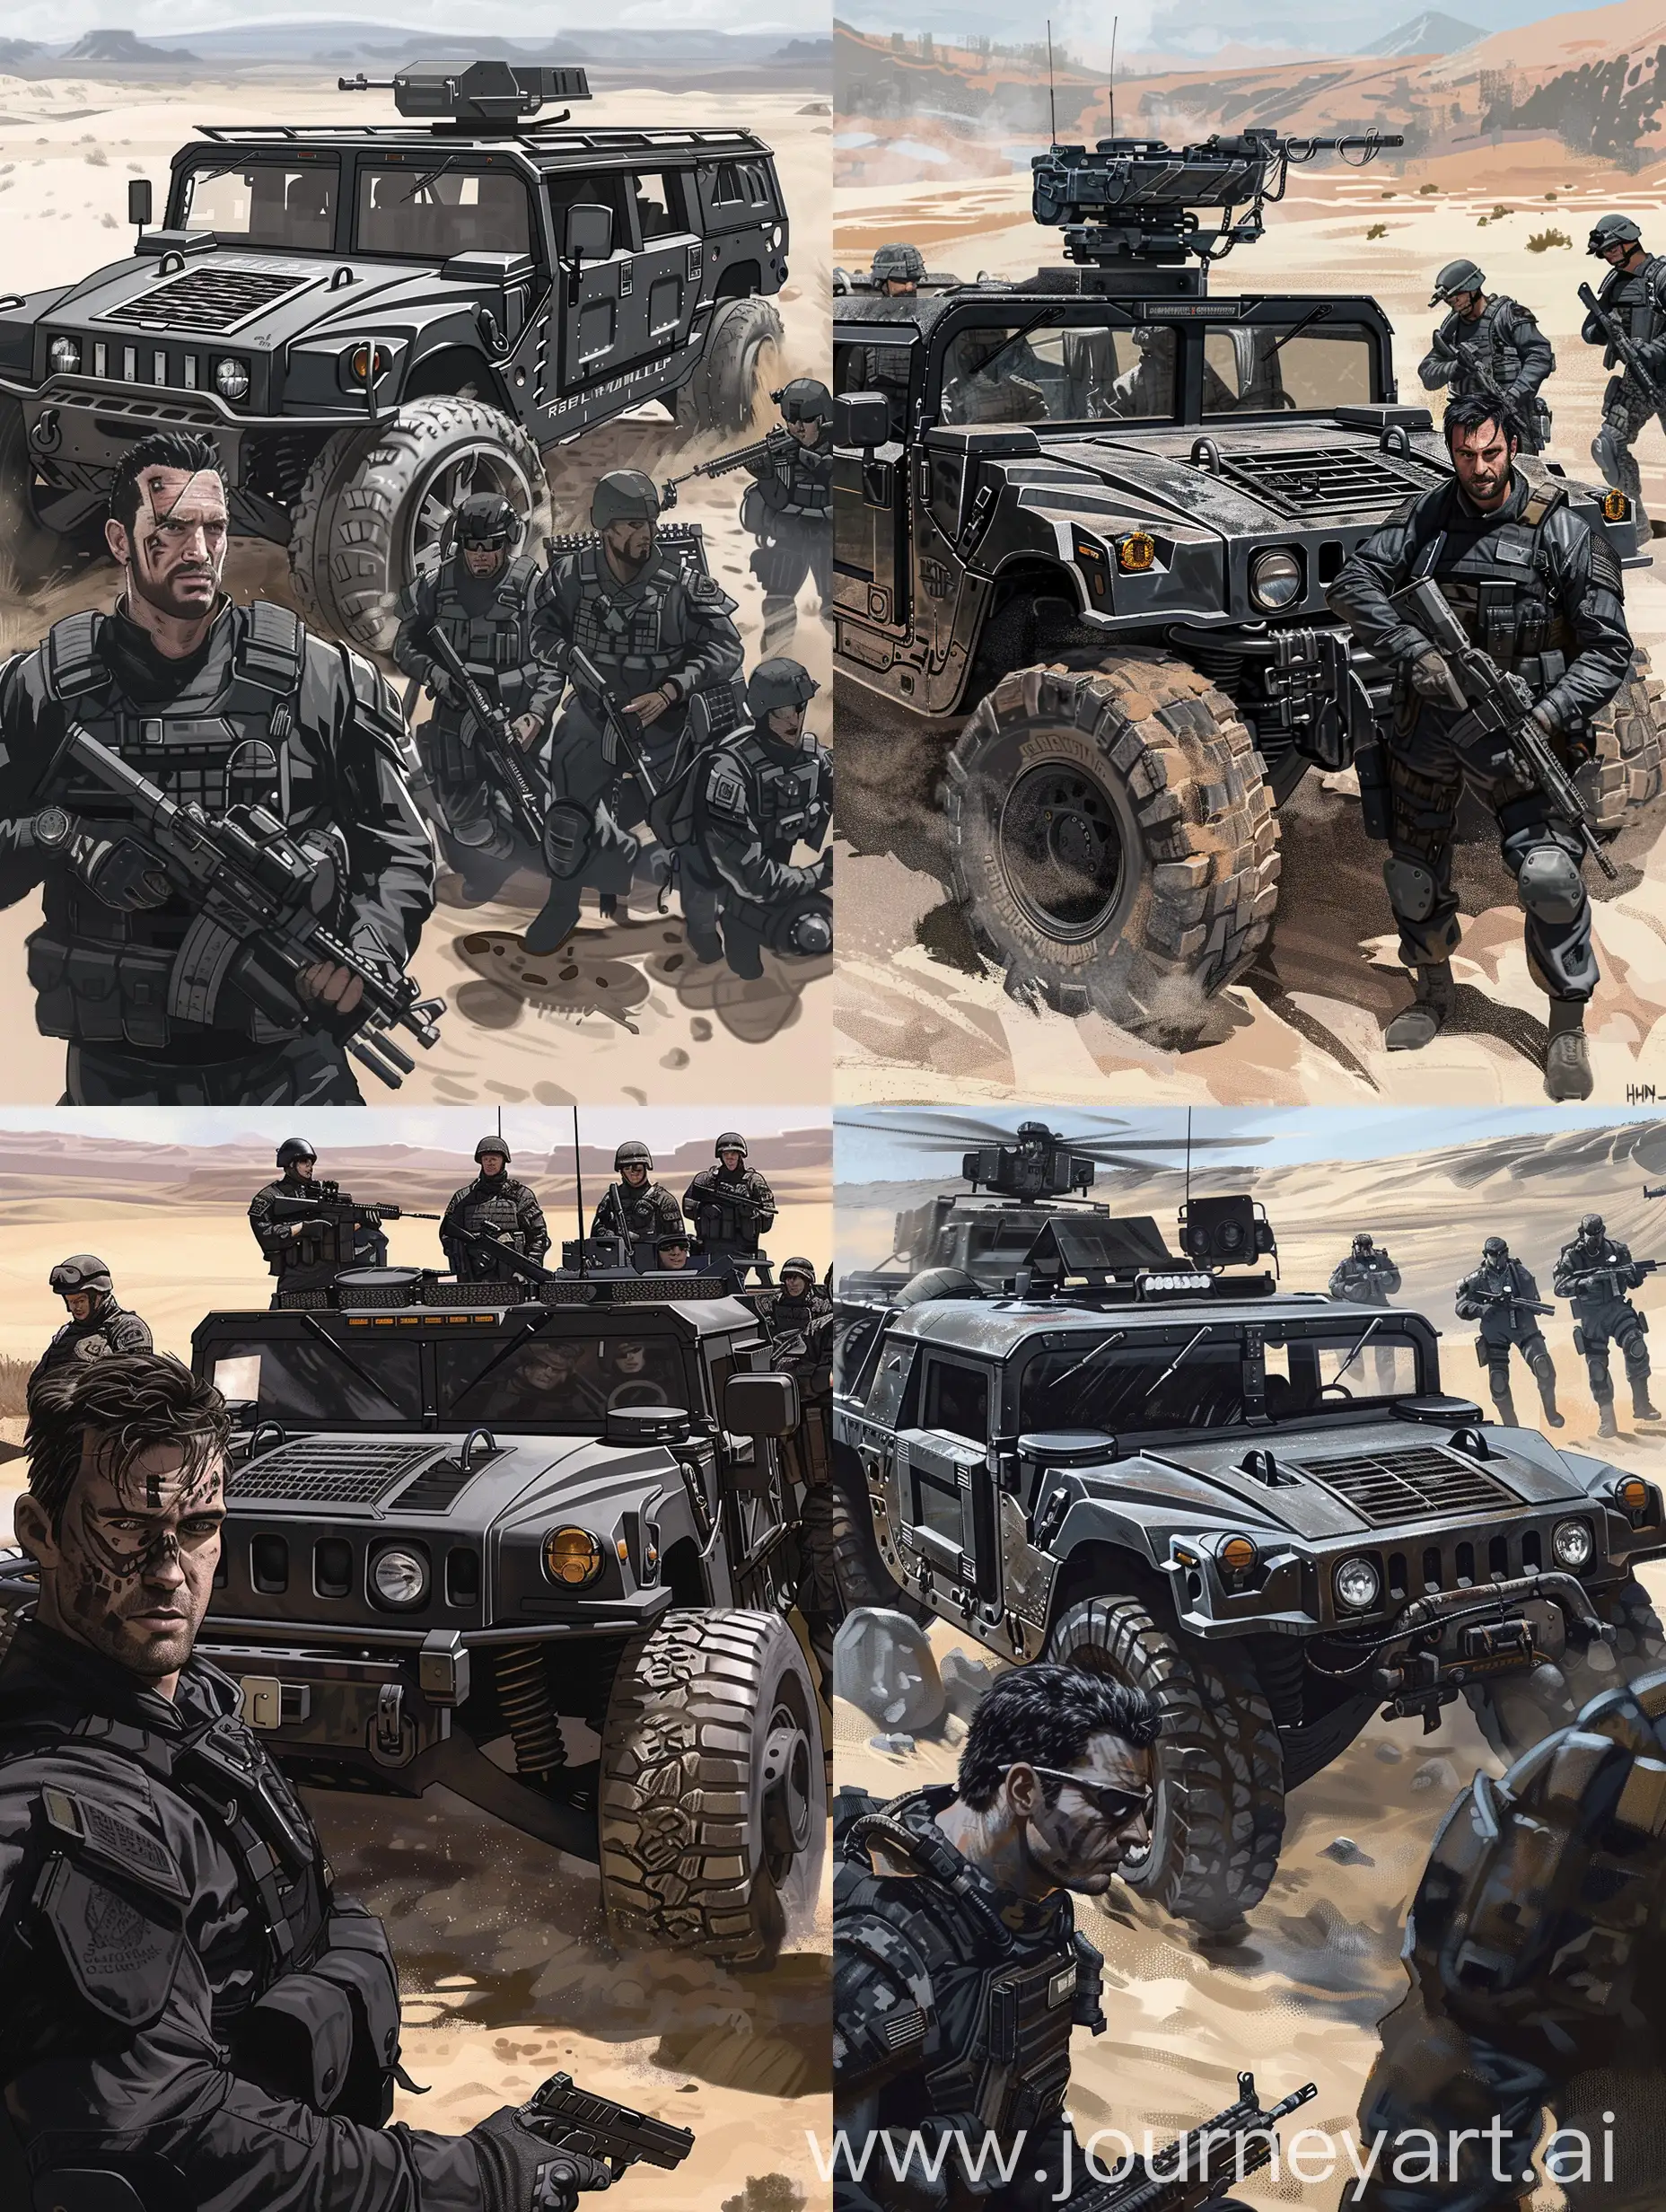 Josh-Dummel-Leads-BlackClad-Soldiers-with-H2-Hummer-in-Desert-Rescue-Mission